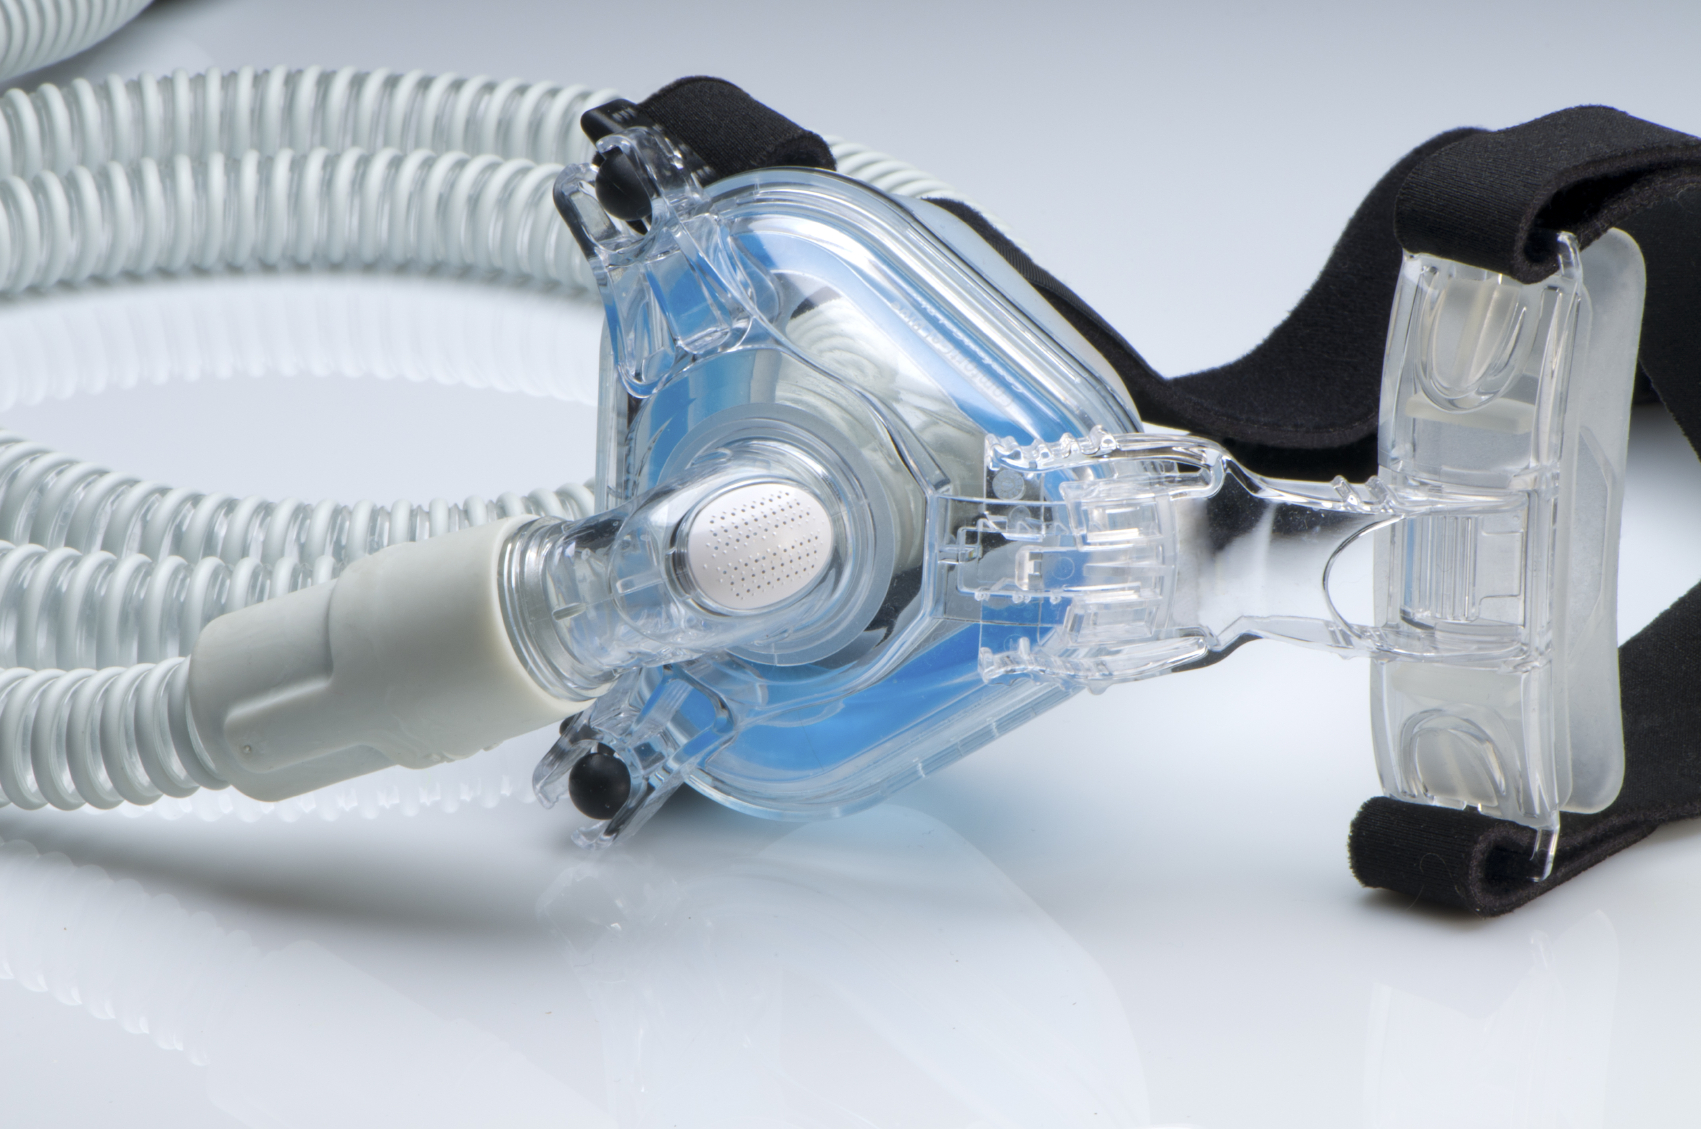 Respiratory Care Device Market Future Outlook 2019 To 2025